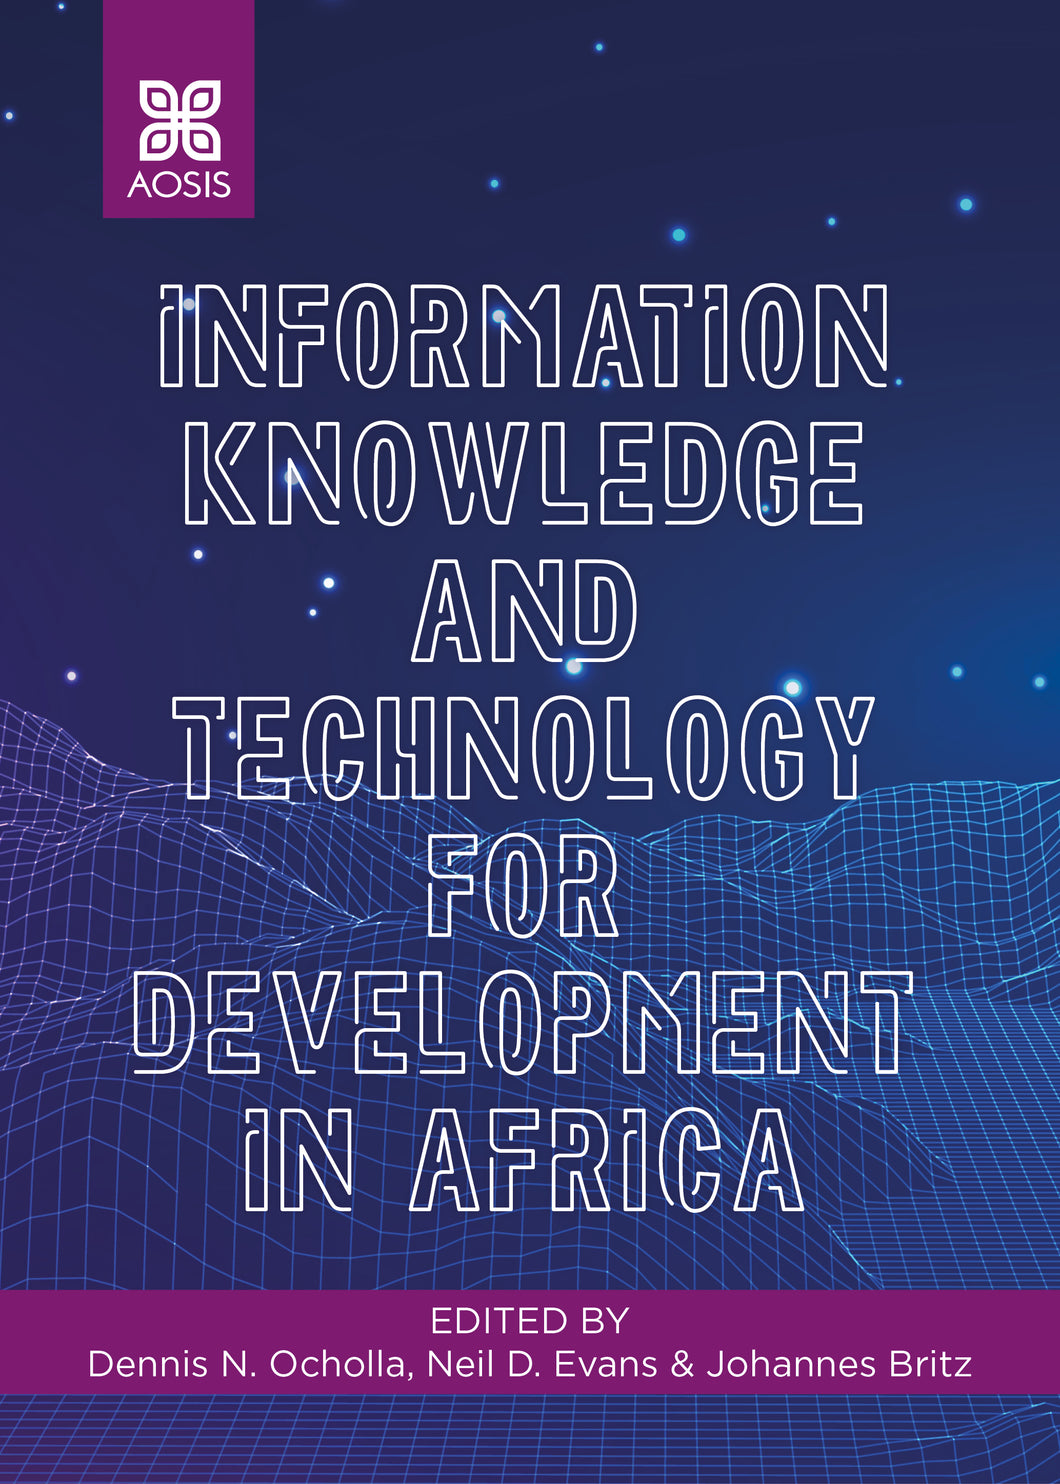 Information knowledge and technology for Development in Africa (Print copy)